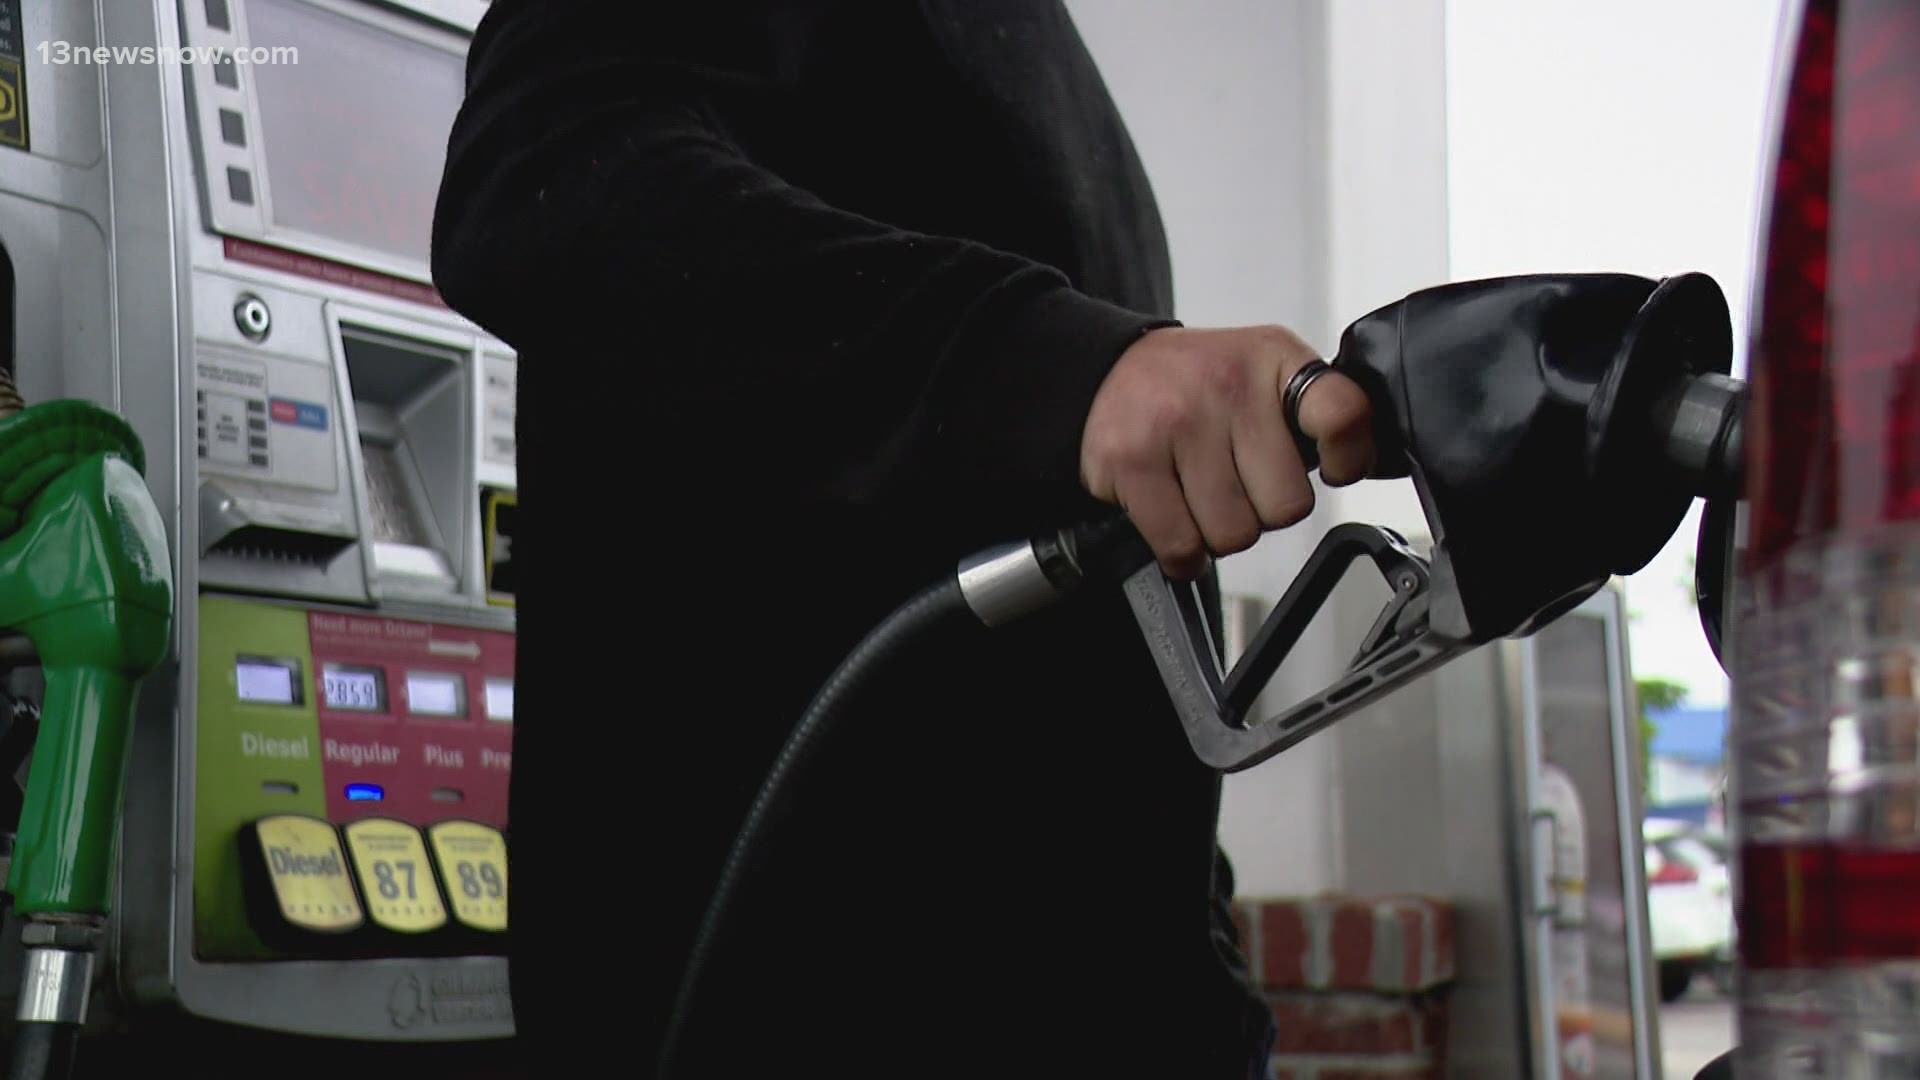 Thousands of stations up and down the East Coast are feeling the effects of the fuel shortage.